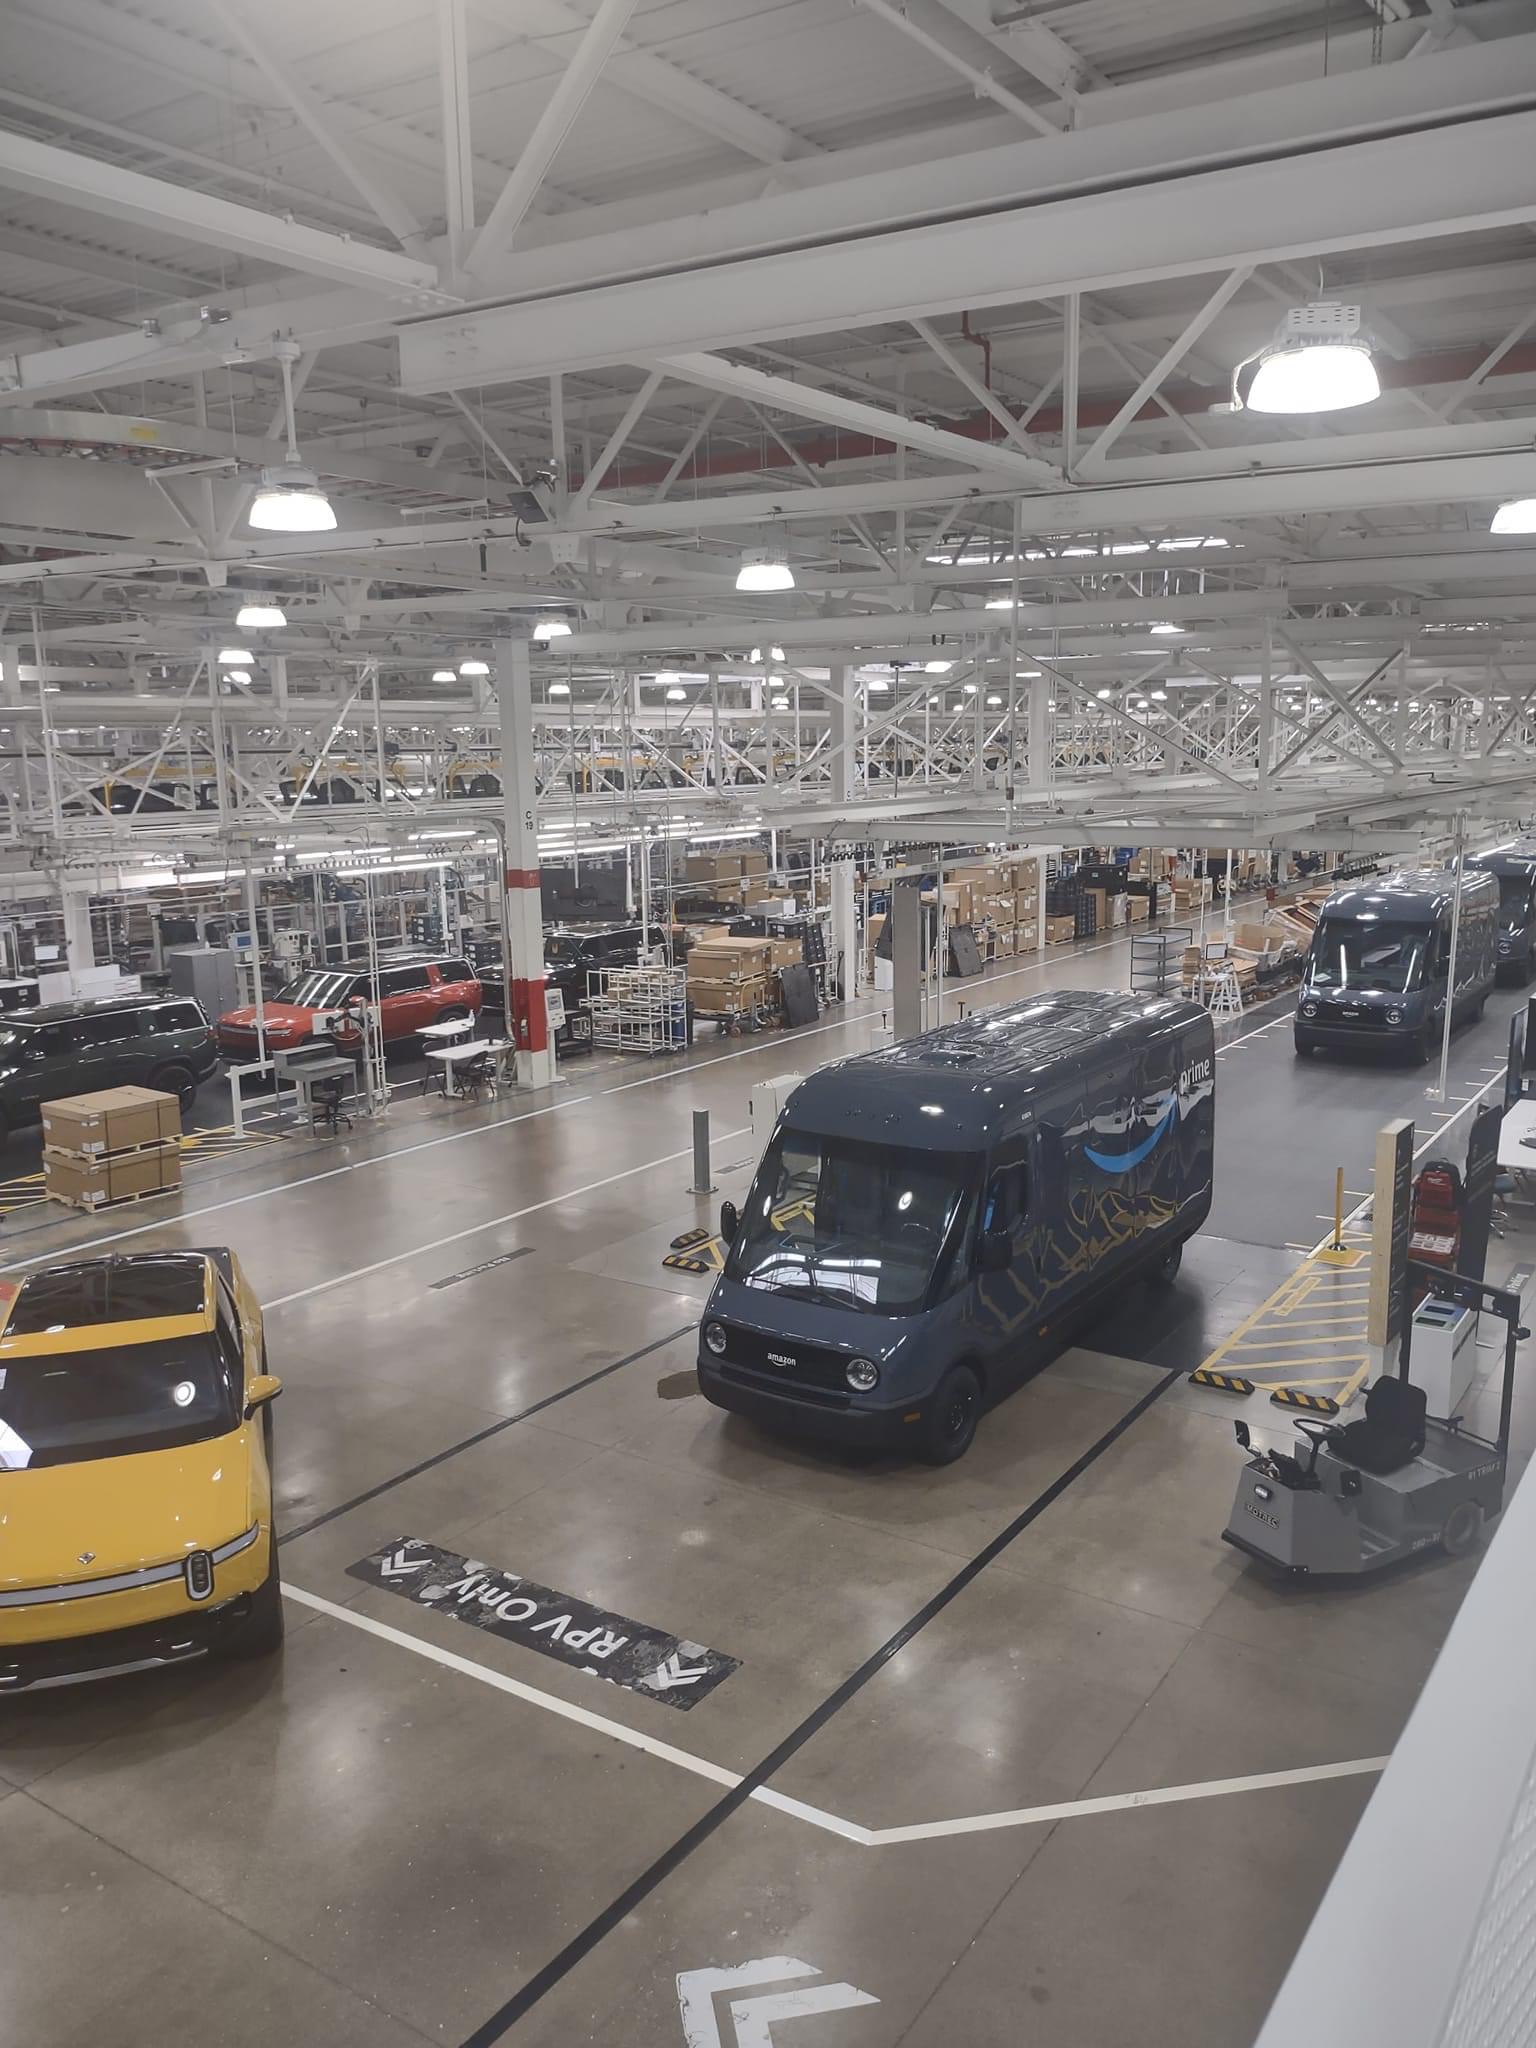 Rivian R1T R1S Tons of Rivians & Amazon Vans ready to ship... photos [removed at request of Rivian] 0FE660A4-3F2B-4A42-9D3B-BCECF5326C47